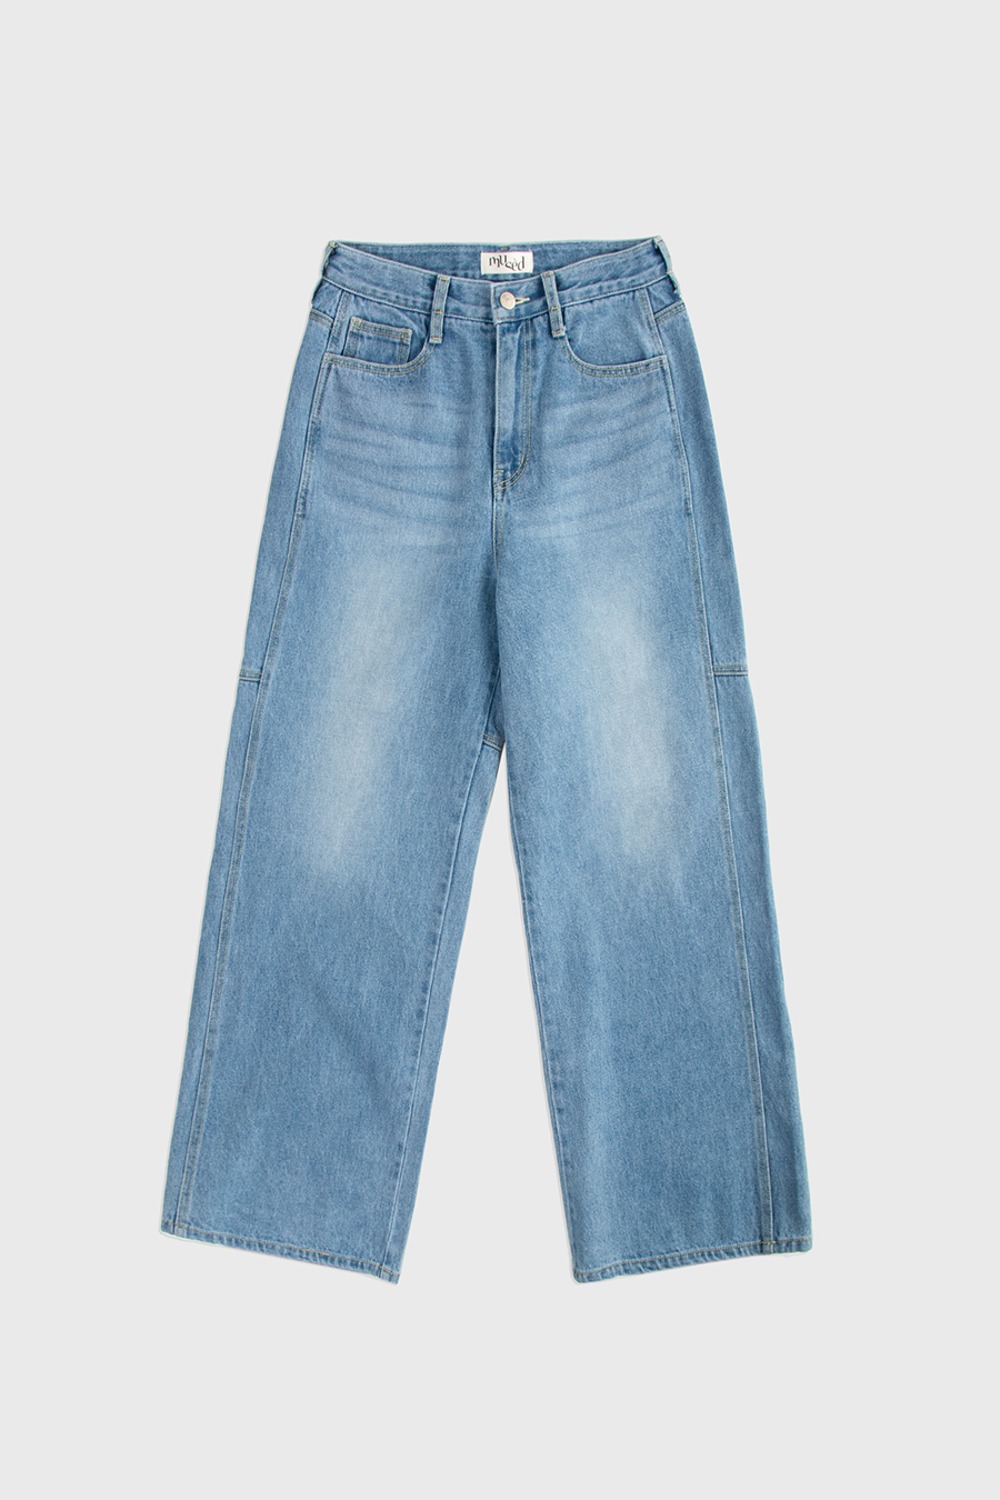 MUSED HIGH RISE WIDE DENIM W/BELT LIGHT BLUE (RECYCLED COTTON)